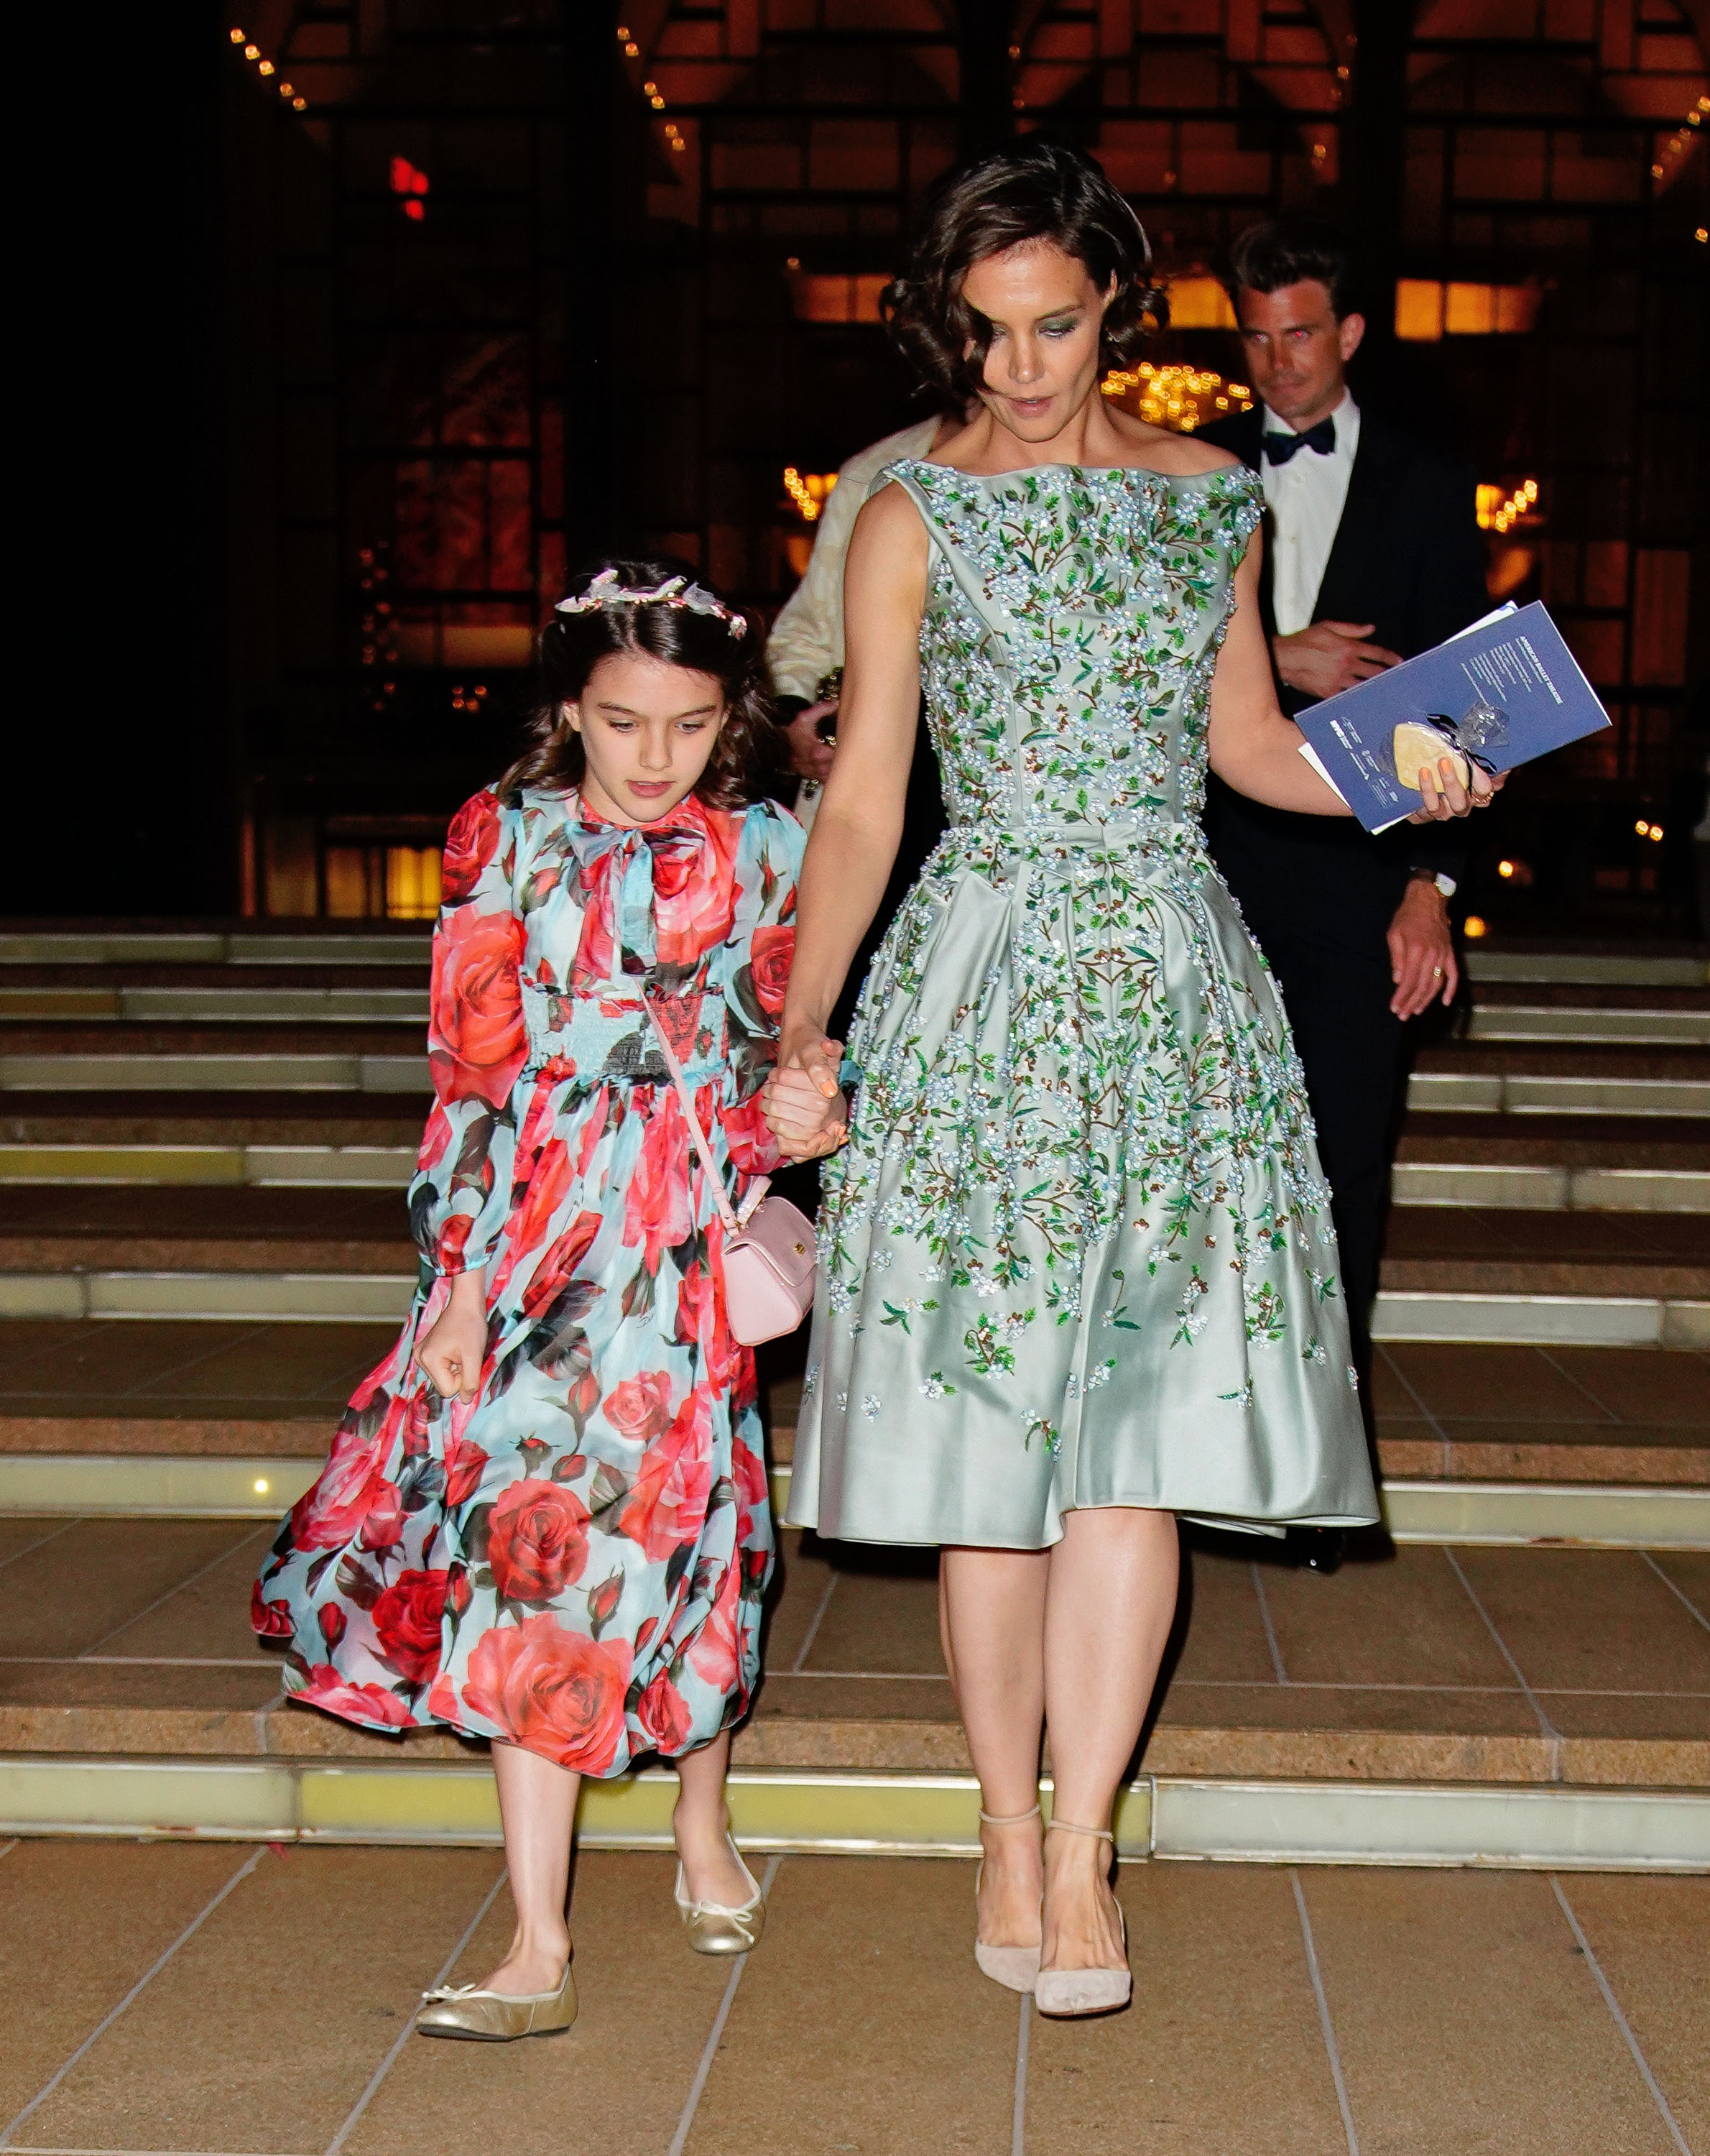 Katie Holmes and Suri Cruise enjoy a night at American Ballet Theater at Lincoln Center in New York City, on May 21, 2018. | Source: Getty Images